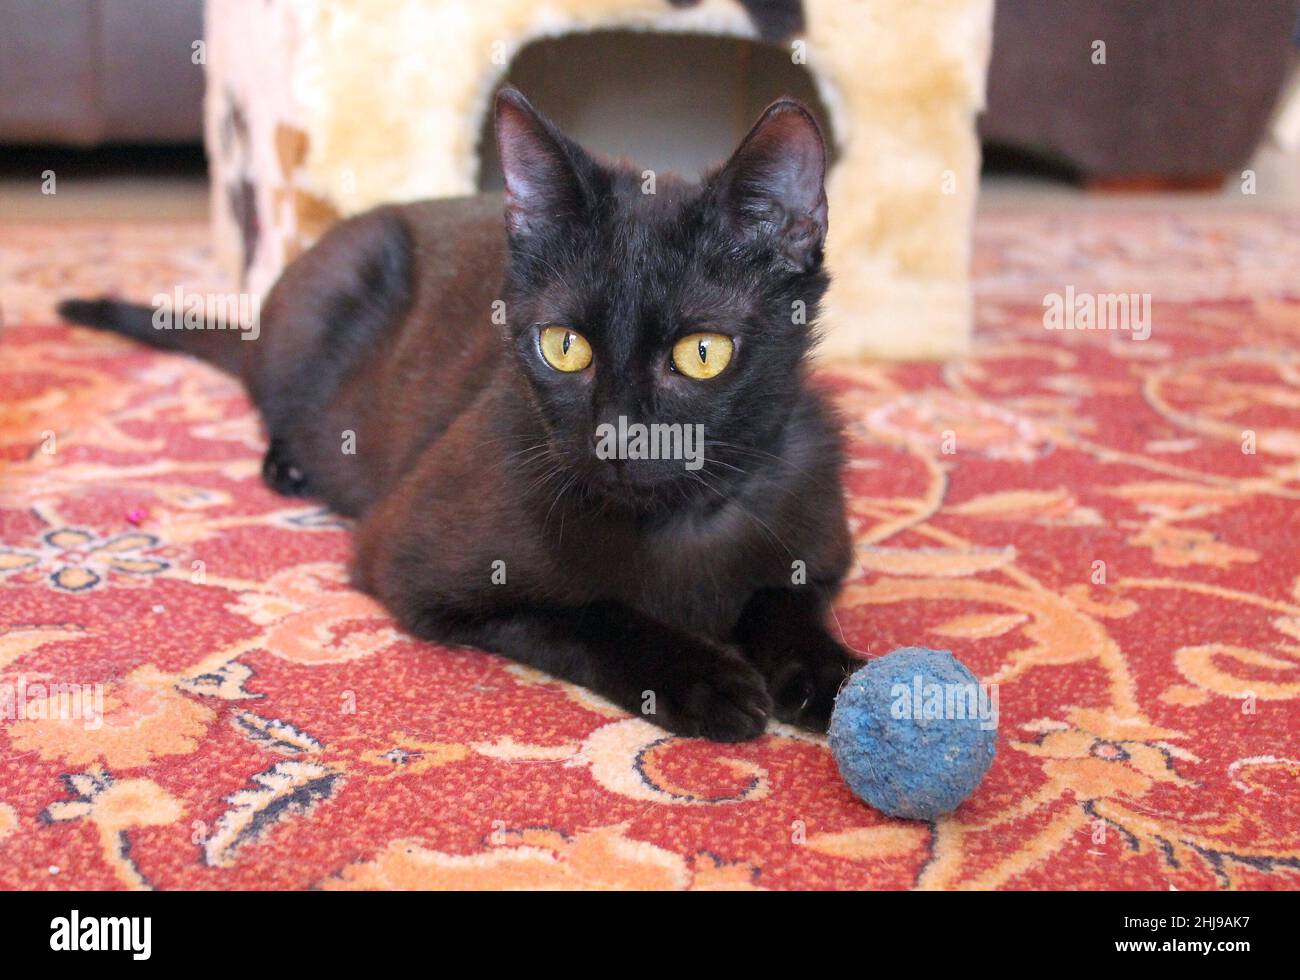 A black cat is lying down, having a play break. Portrait of a black cat with yellow eyes. A scratching post in the background. Stock Photo